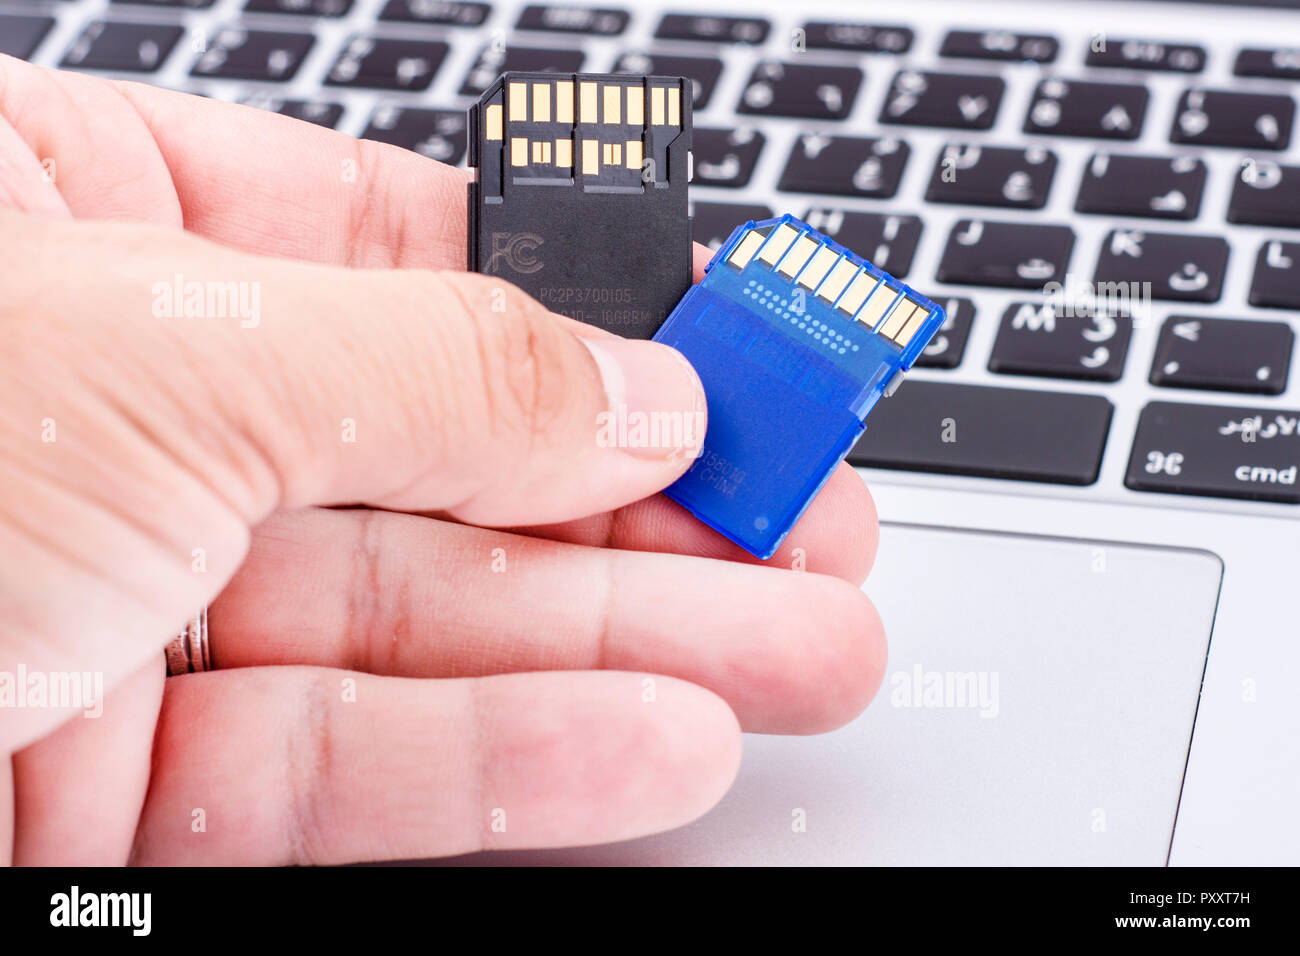 Fast SD memory card holding by fingers Stock Photo